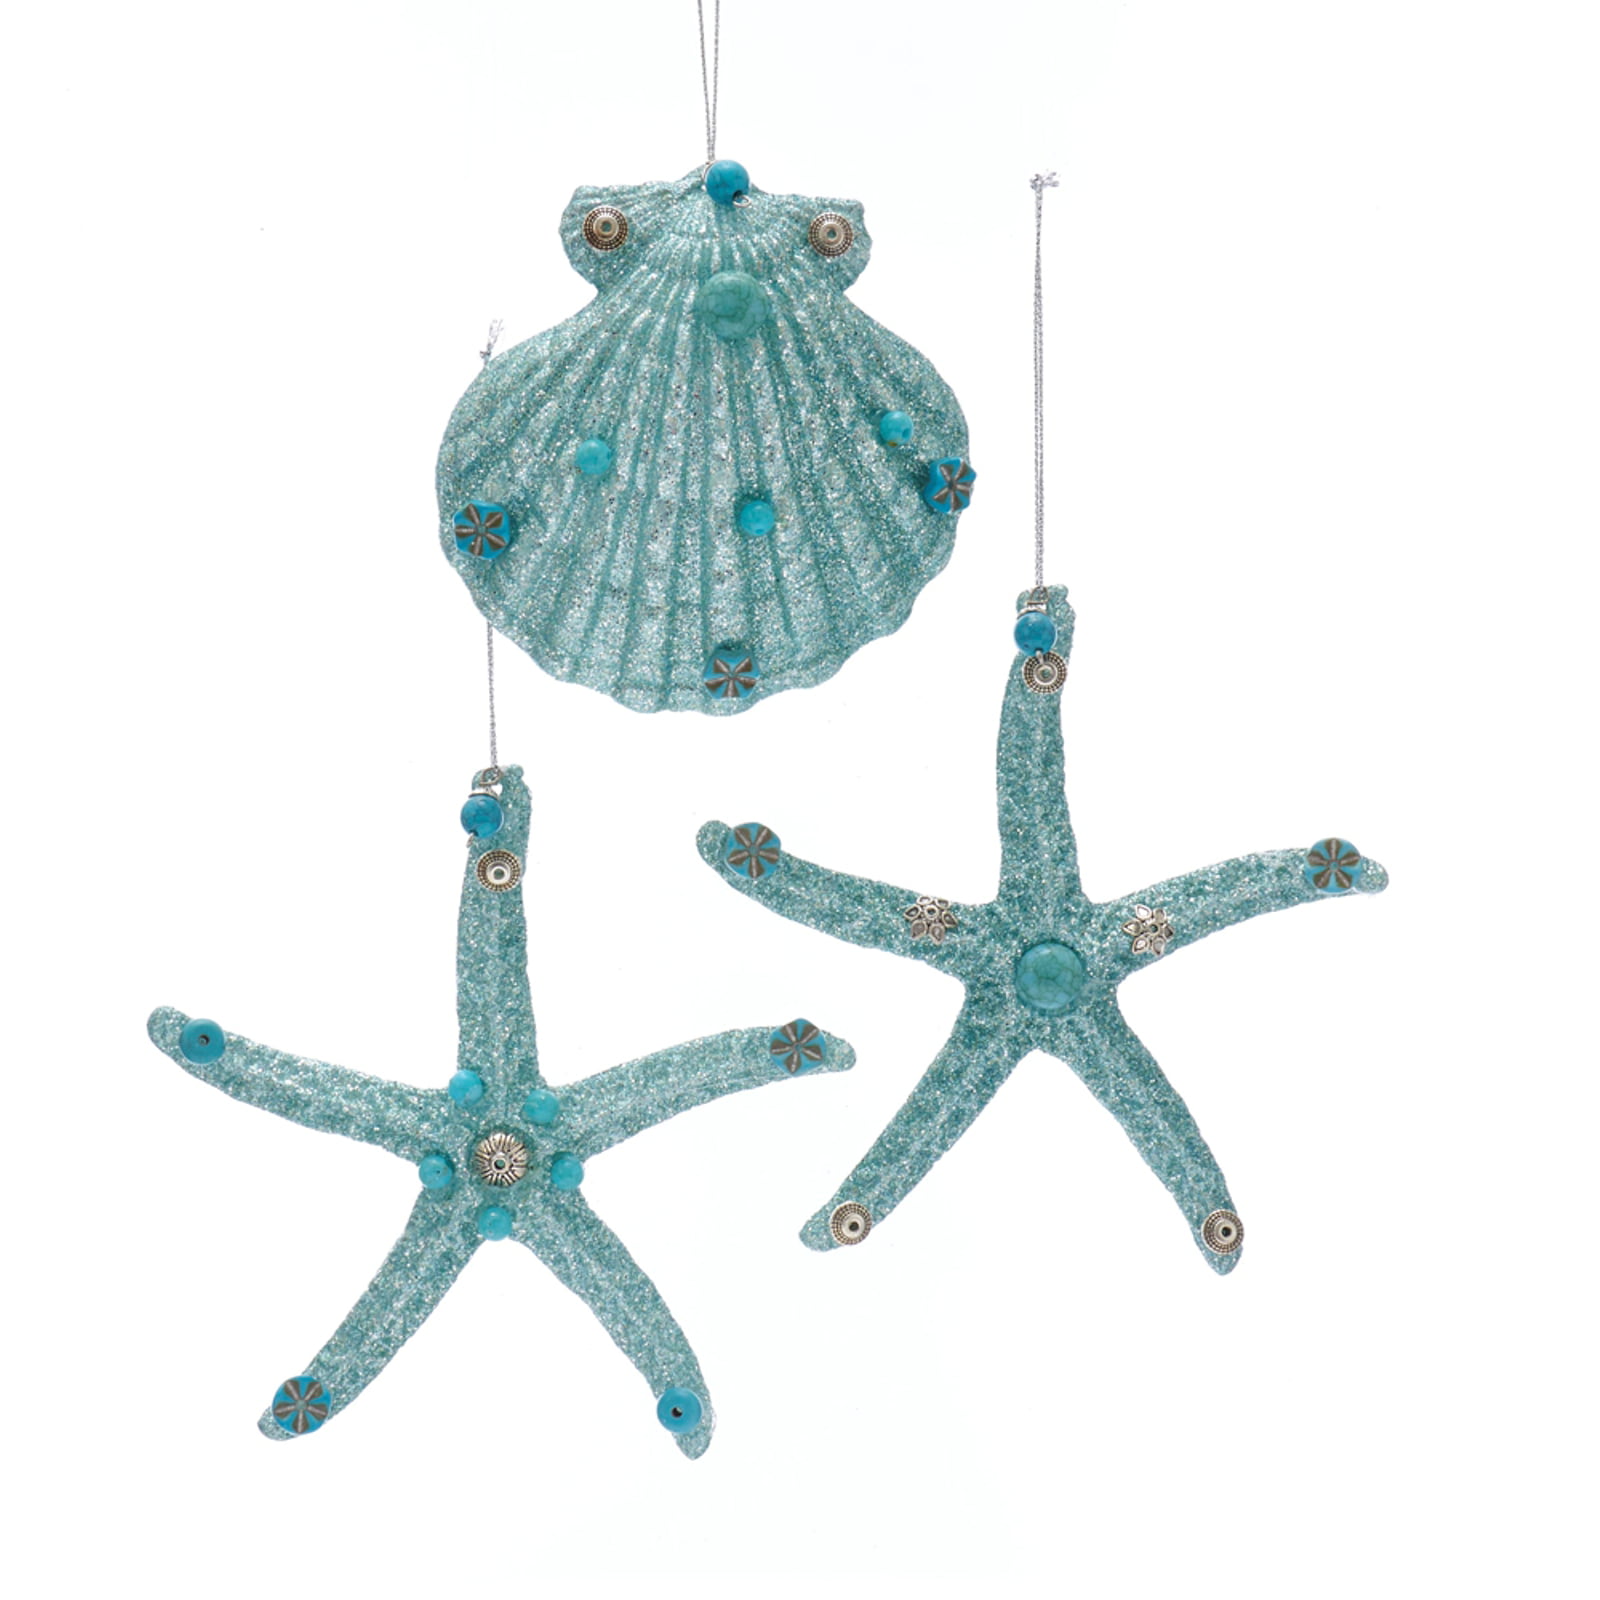 Details about   CW_ 10cm Resin Beach Coastal Artificial Starfish DIY Craft Ornament Home Party D 